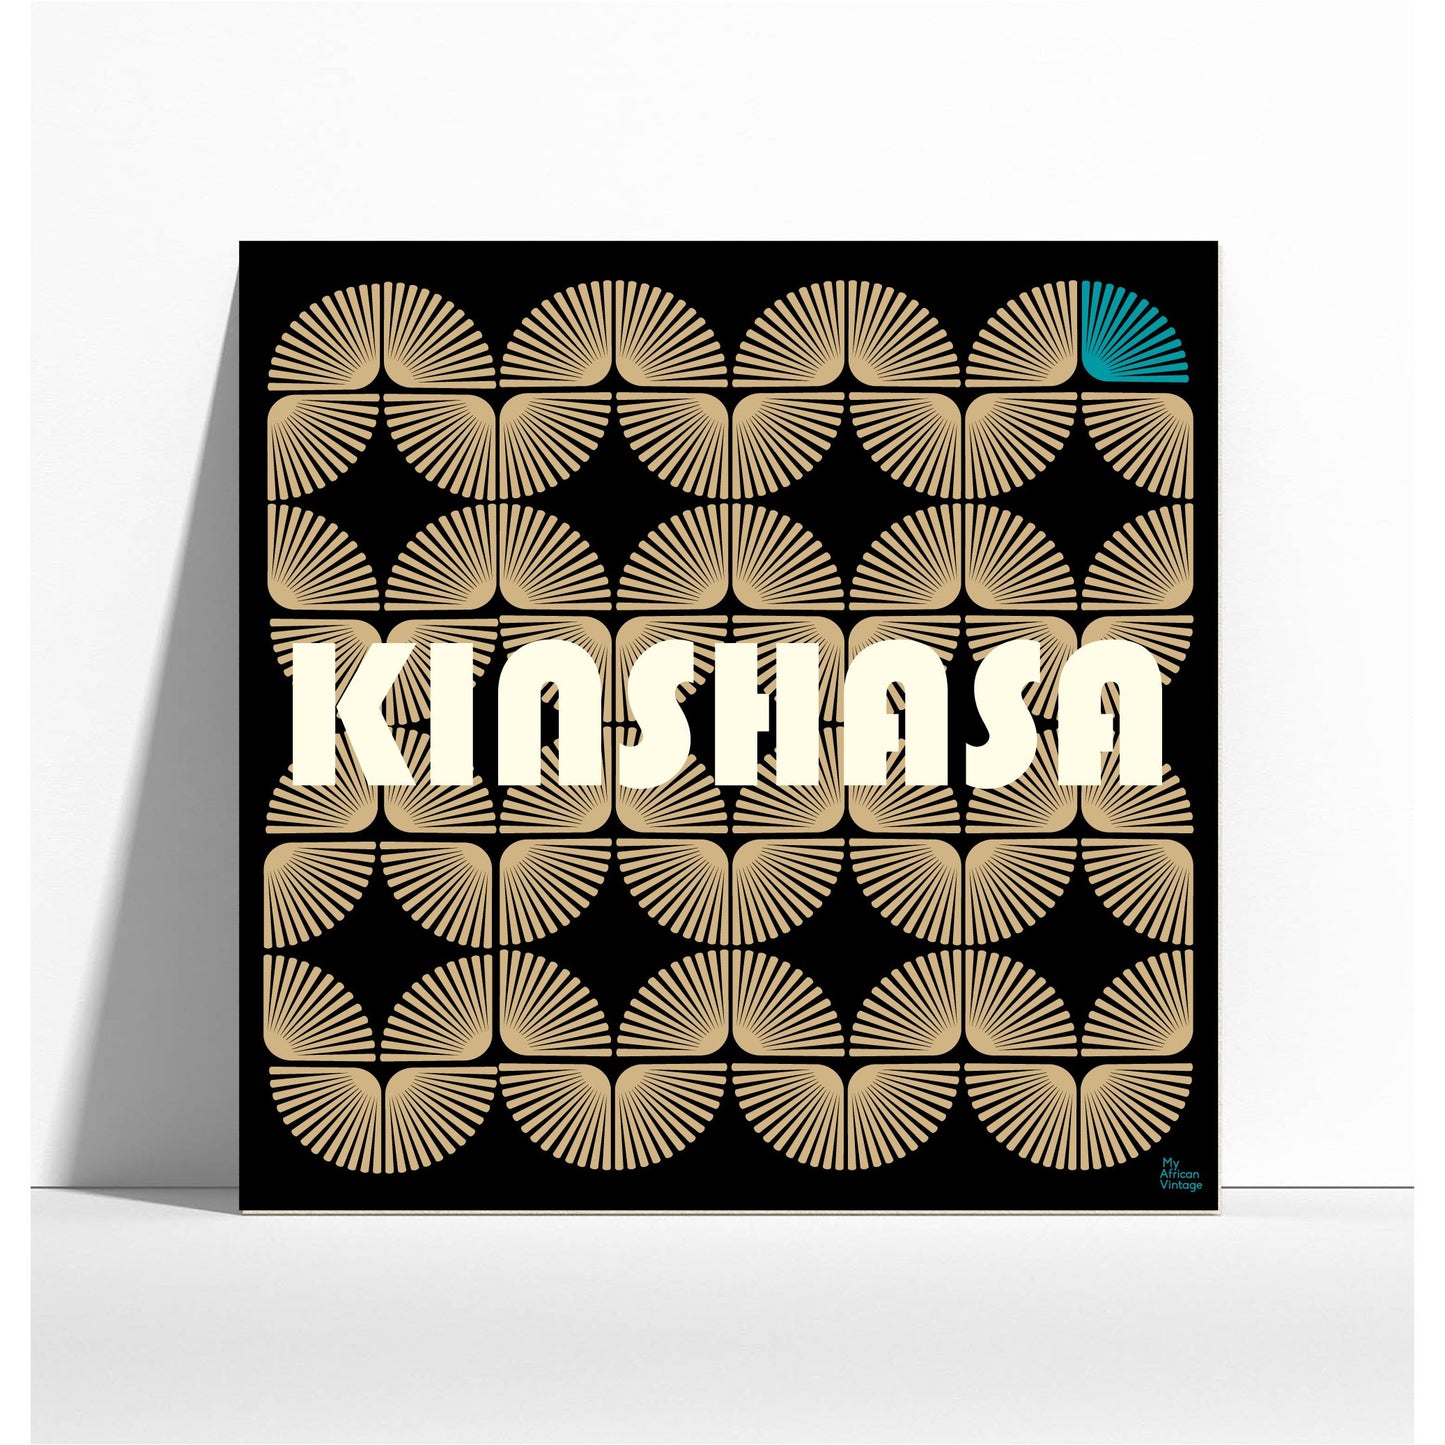 "Kinshasa" retro style poster - "My African Vintage" collection